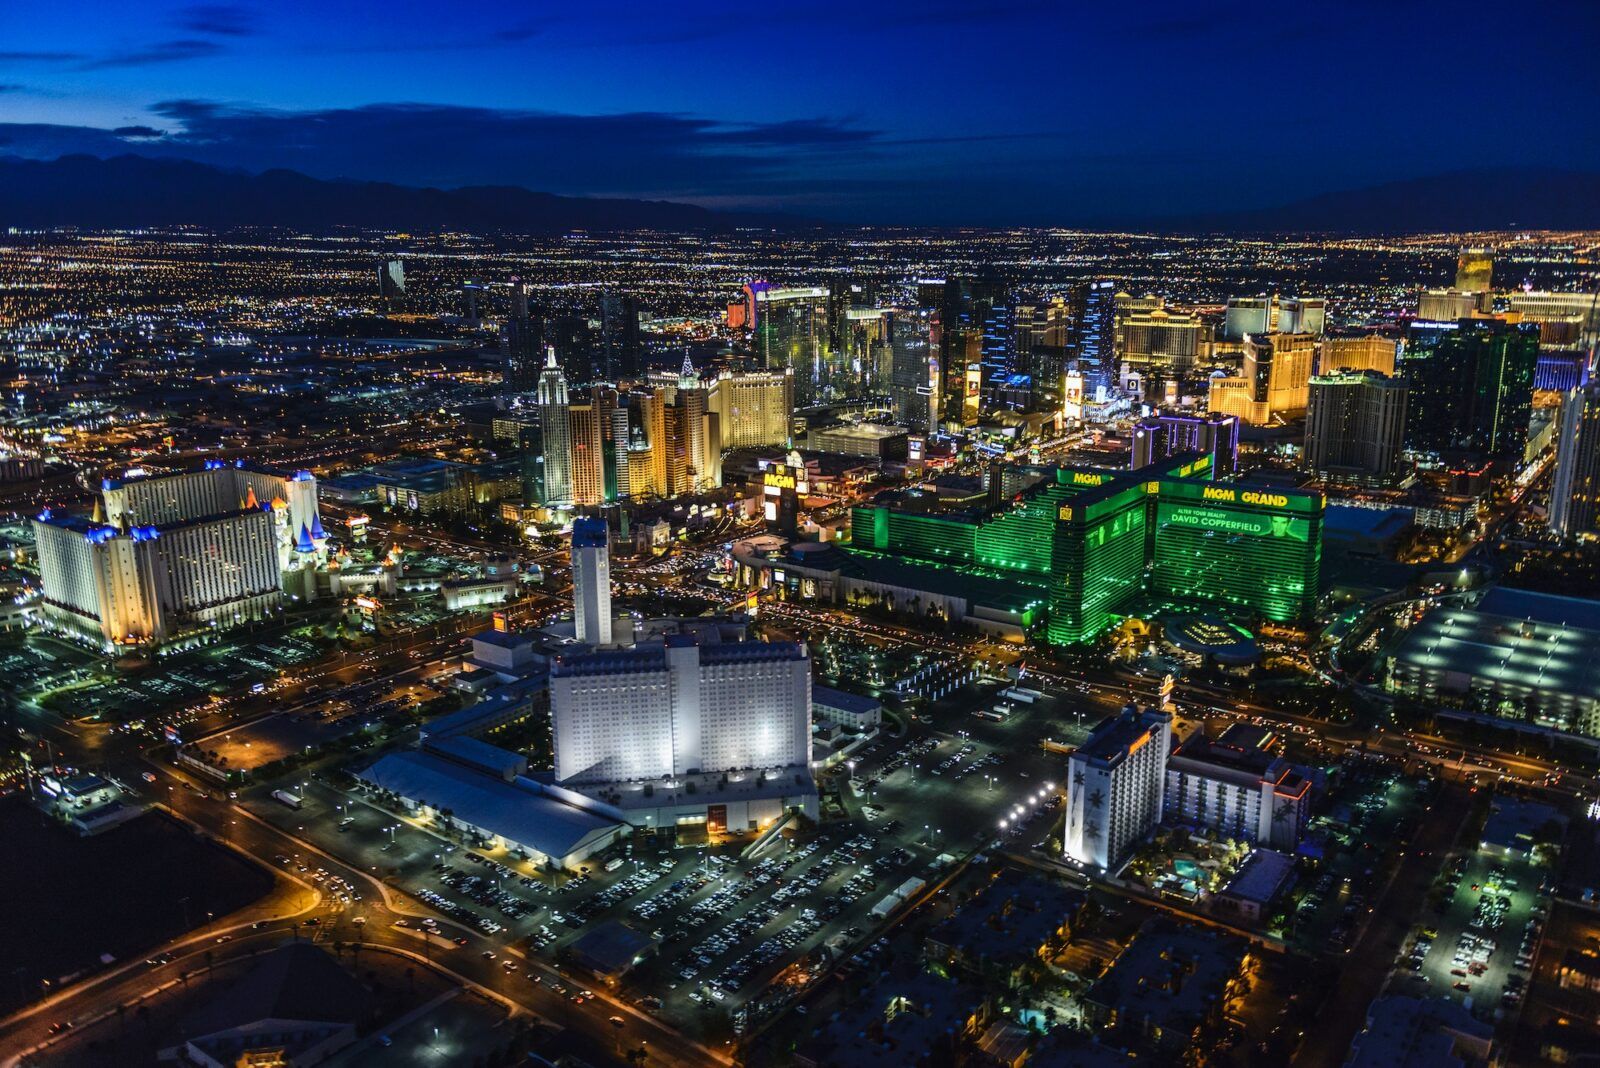 54955,Aerial view of Las Vegas cityscape lit up at night, Las Vegas, Nevada, United States